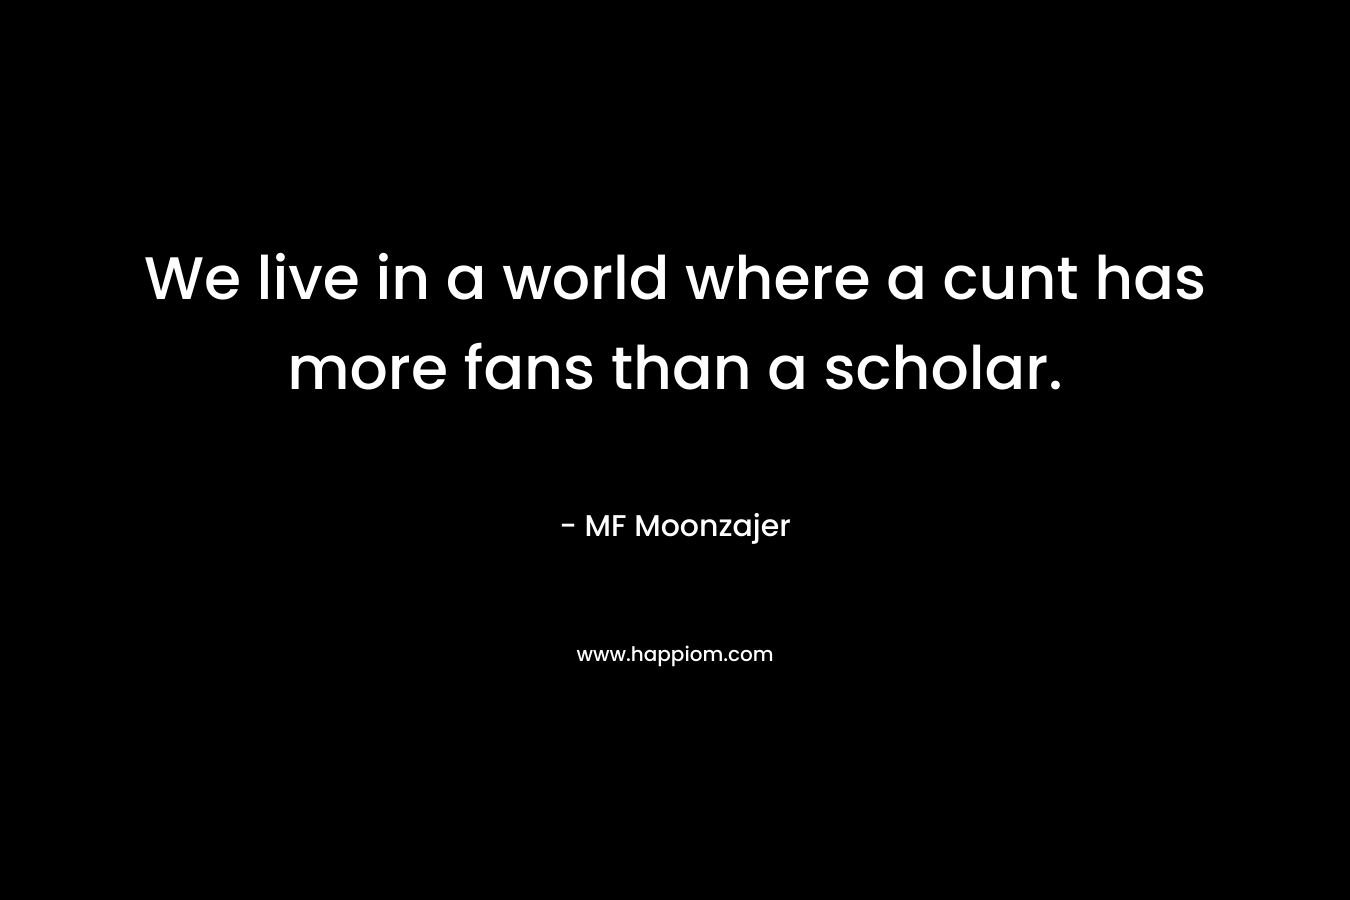 We live in a world where a cunt has more fans than a scholar. – MF Moonzajer